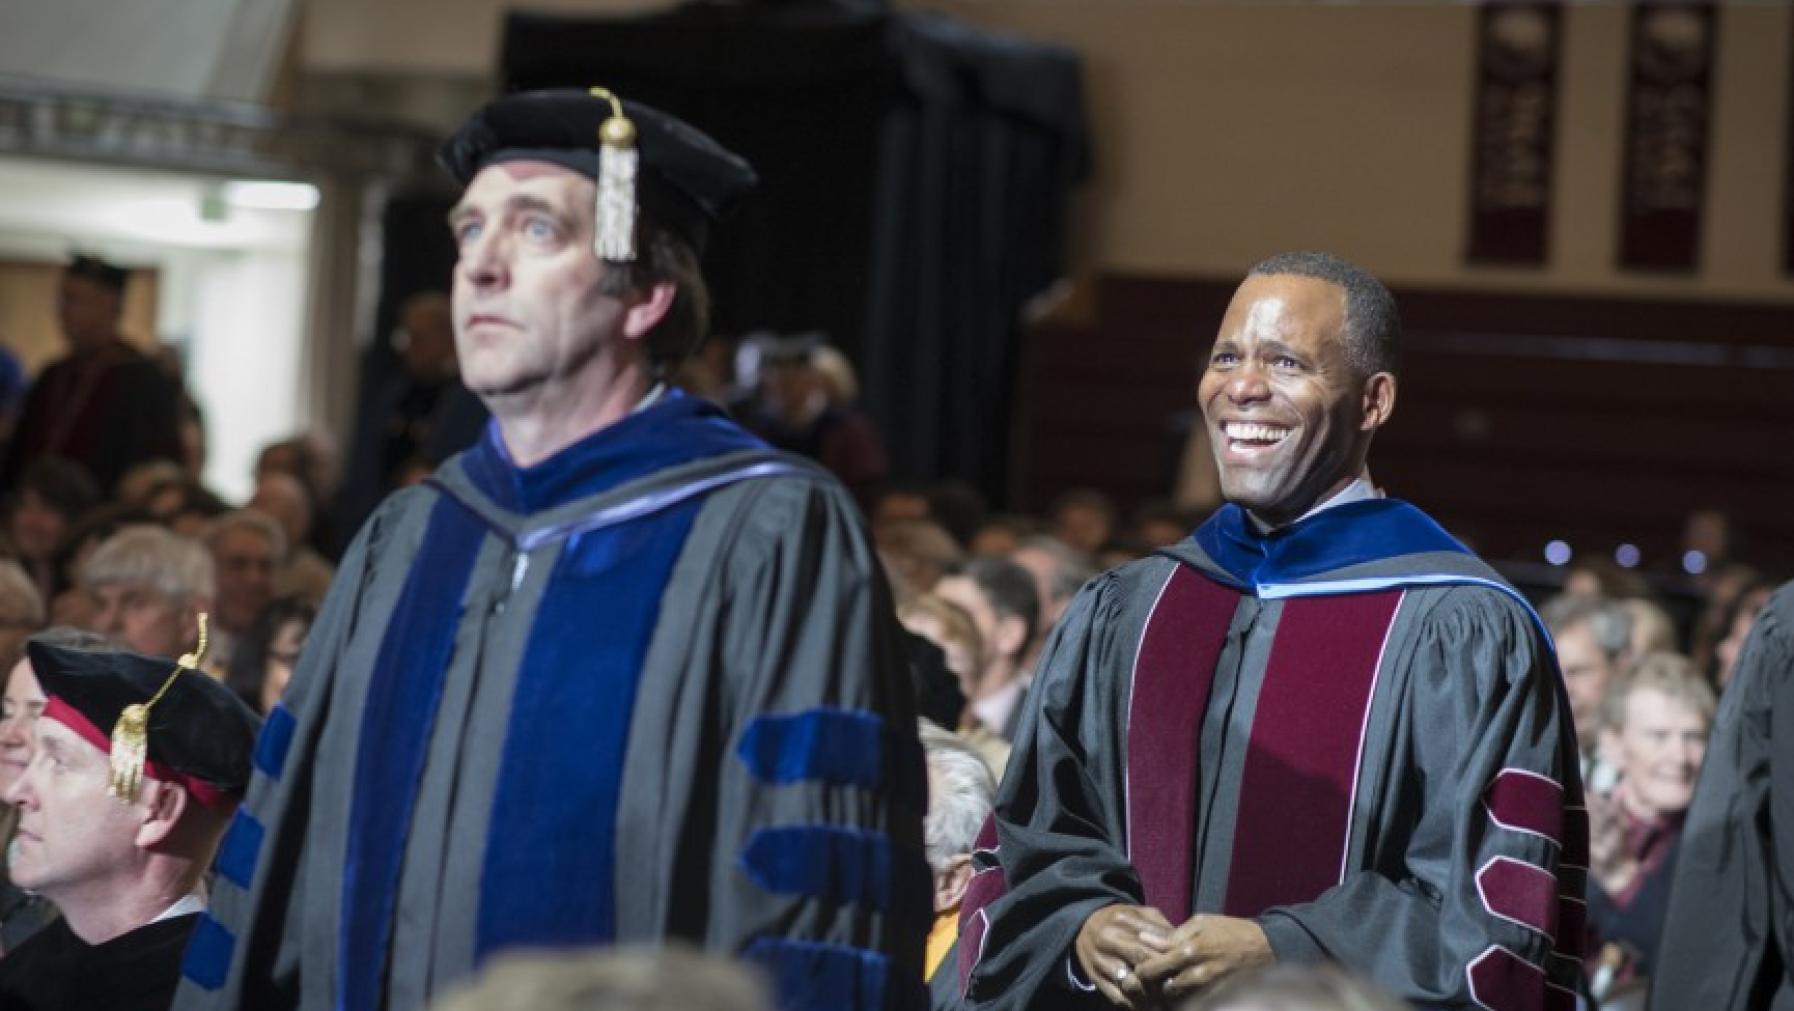 President Crawford reacts during the procession in the Installation Ceremony. Photo by Ross Mulhausen.